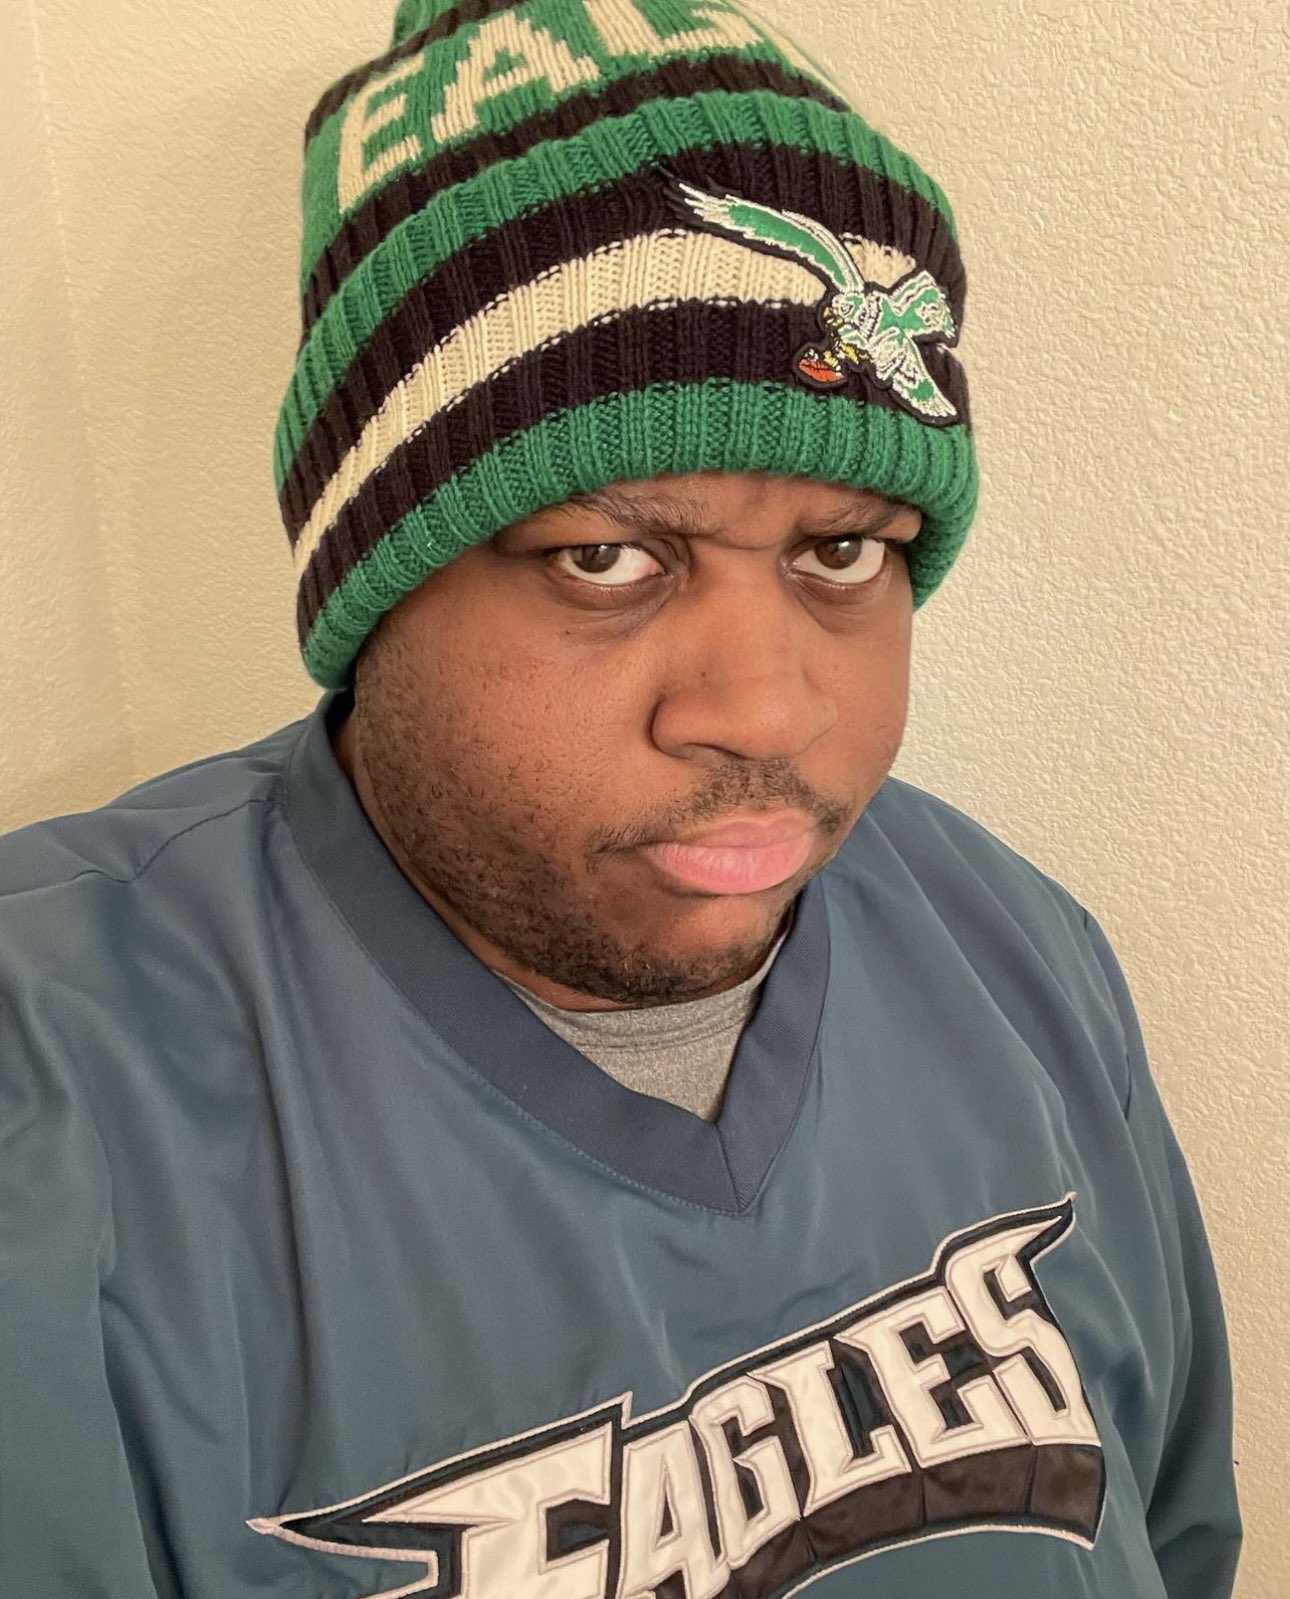 Eagles Superfan 'EDP445' Caught Trying To Meet A 13-Year-Old For Sex (VIDEO)